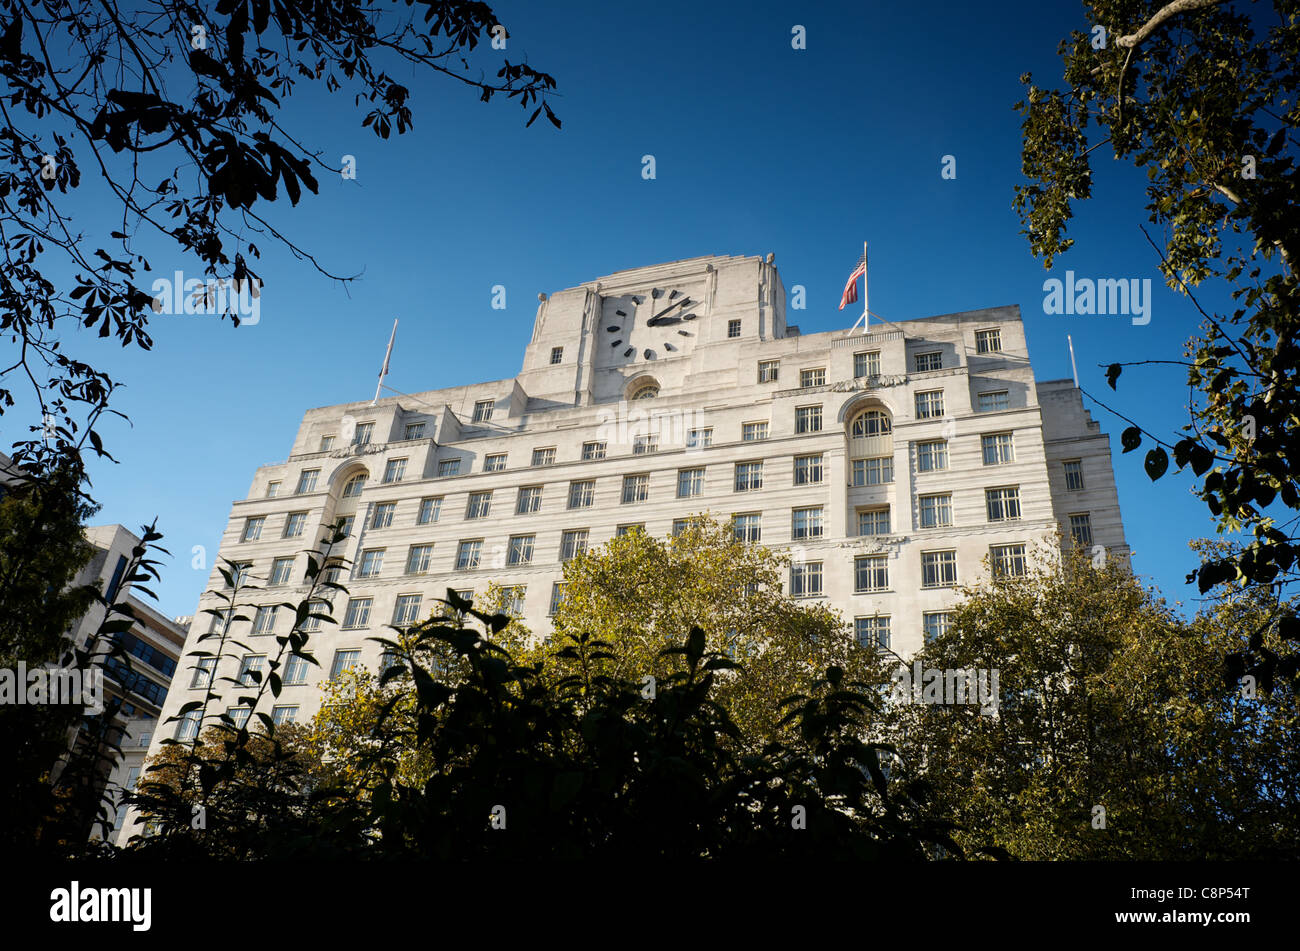 Shell Mex House (80), Embankment, London Banque D'Images